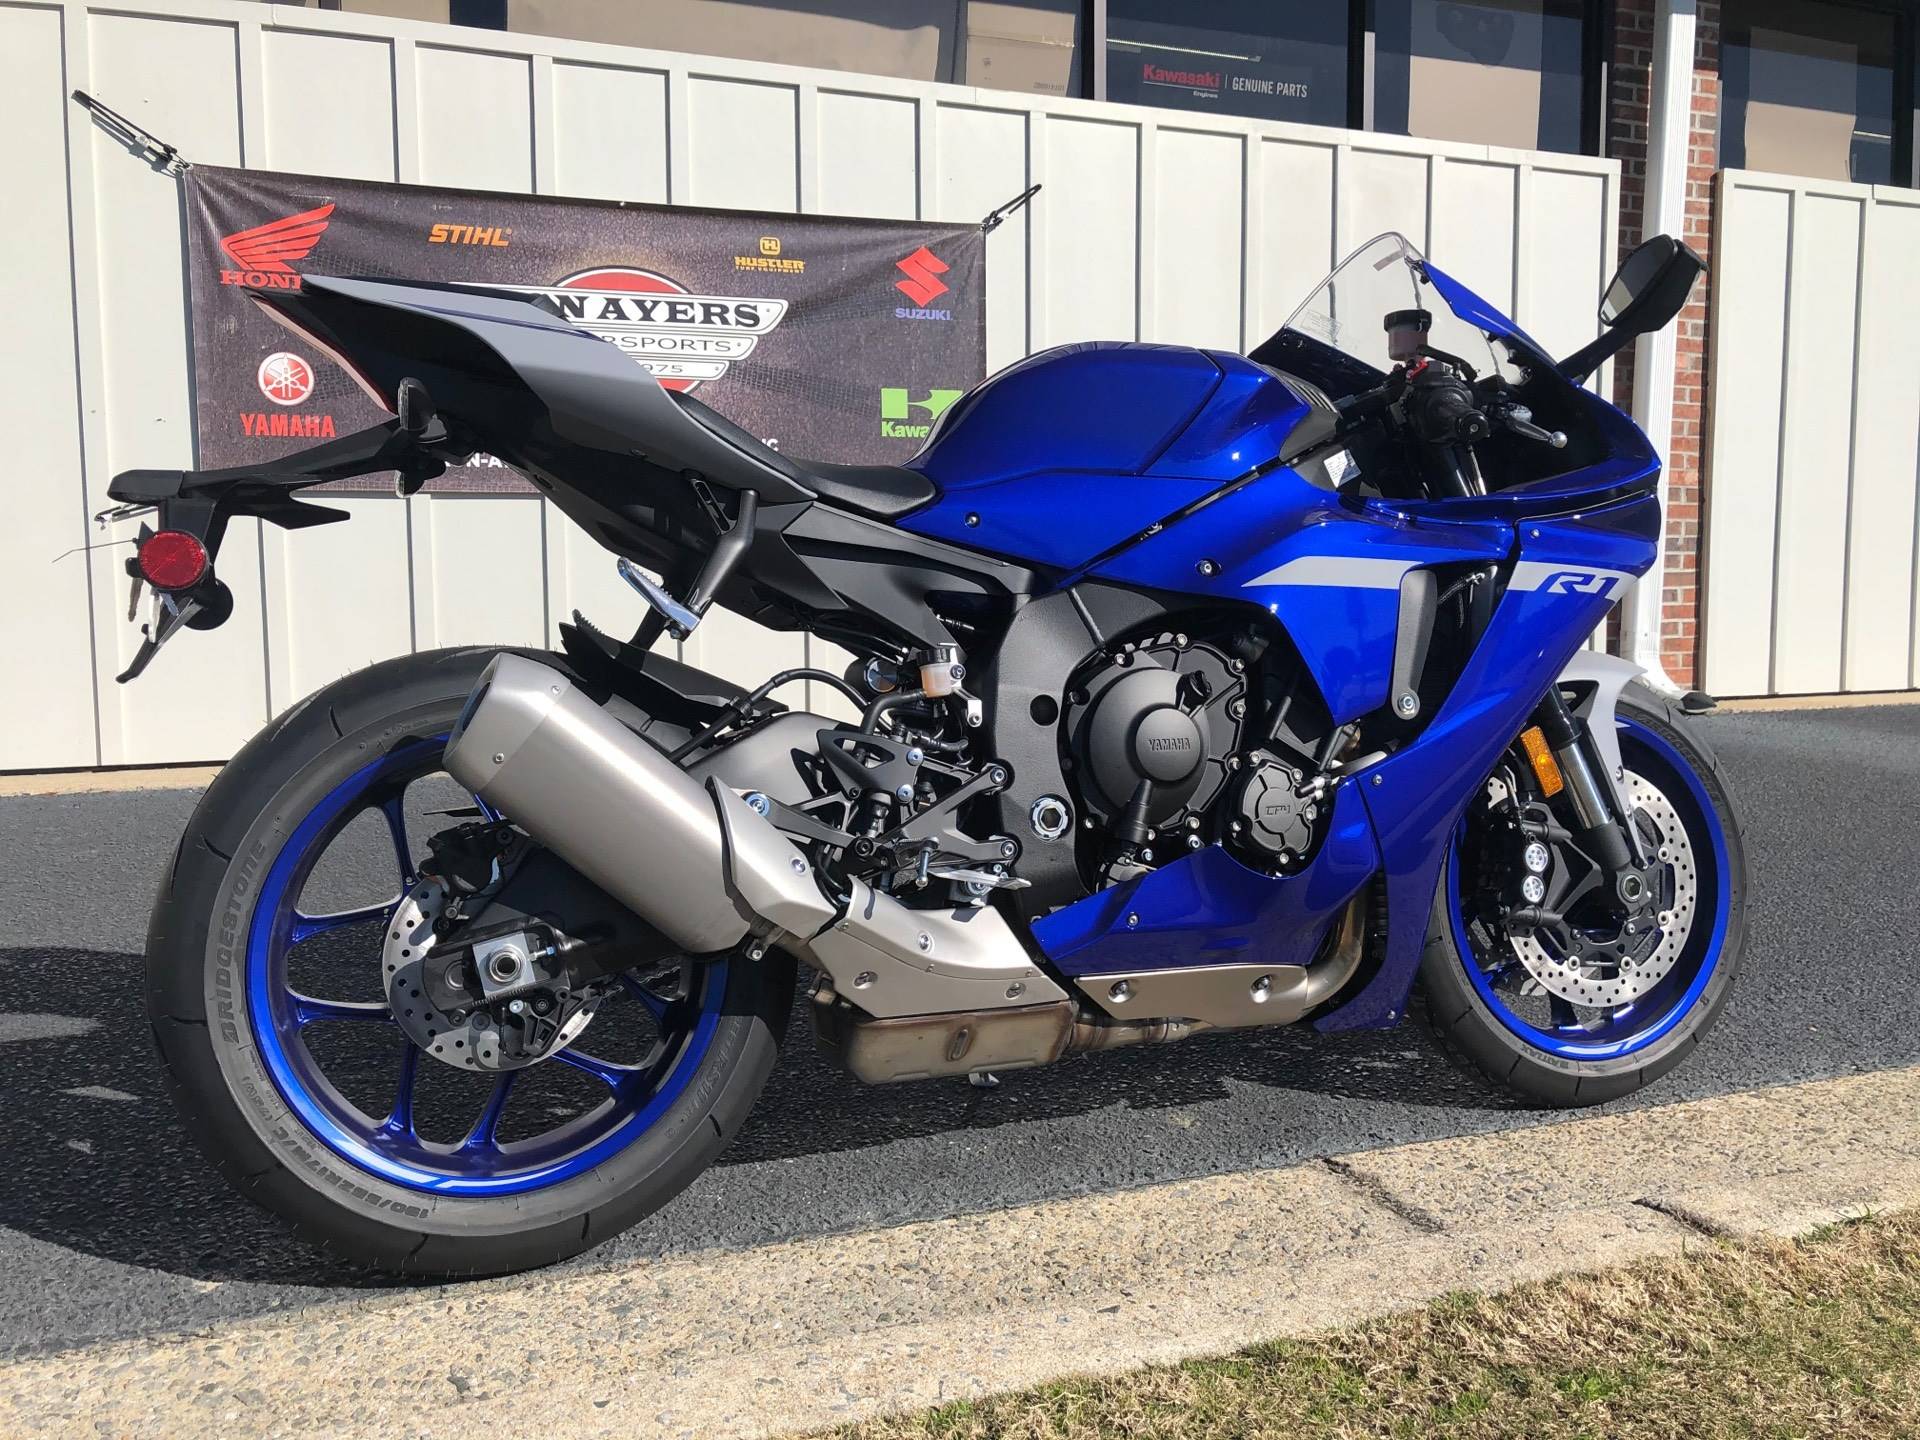 New 2021 Yamaha YZFR1 Motorcycles in Greenville, NC Stock Number N/A